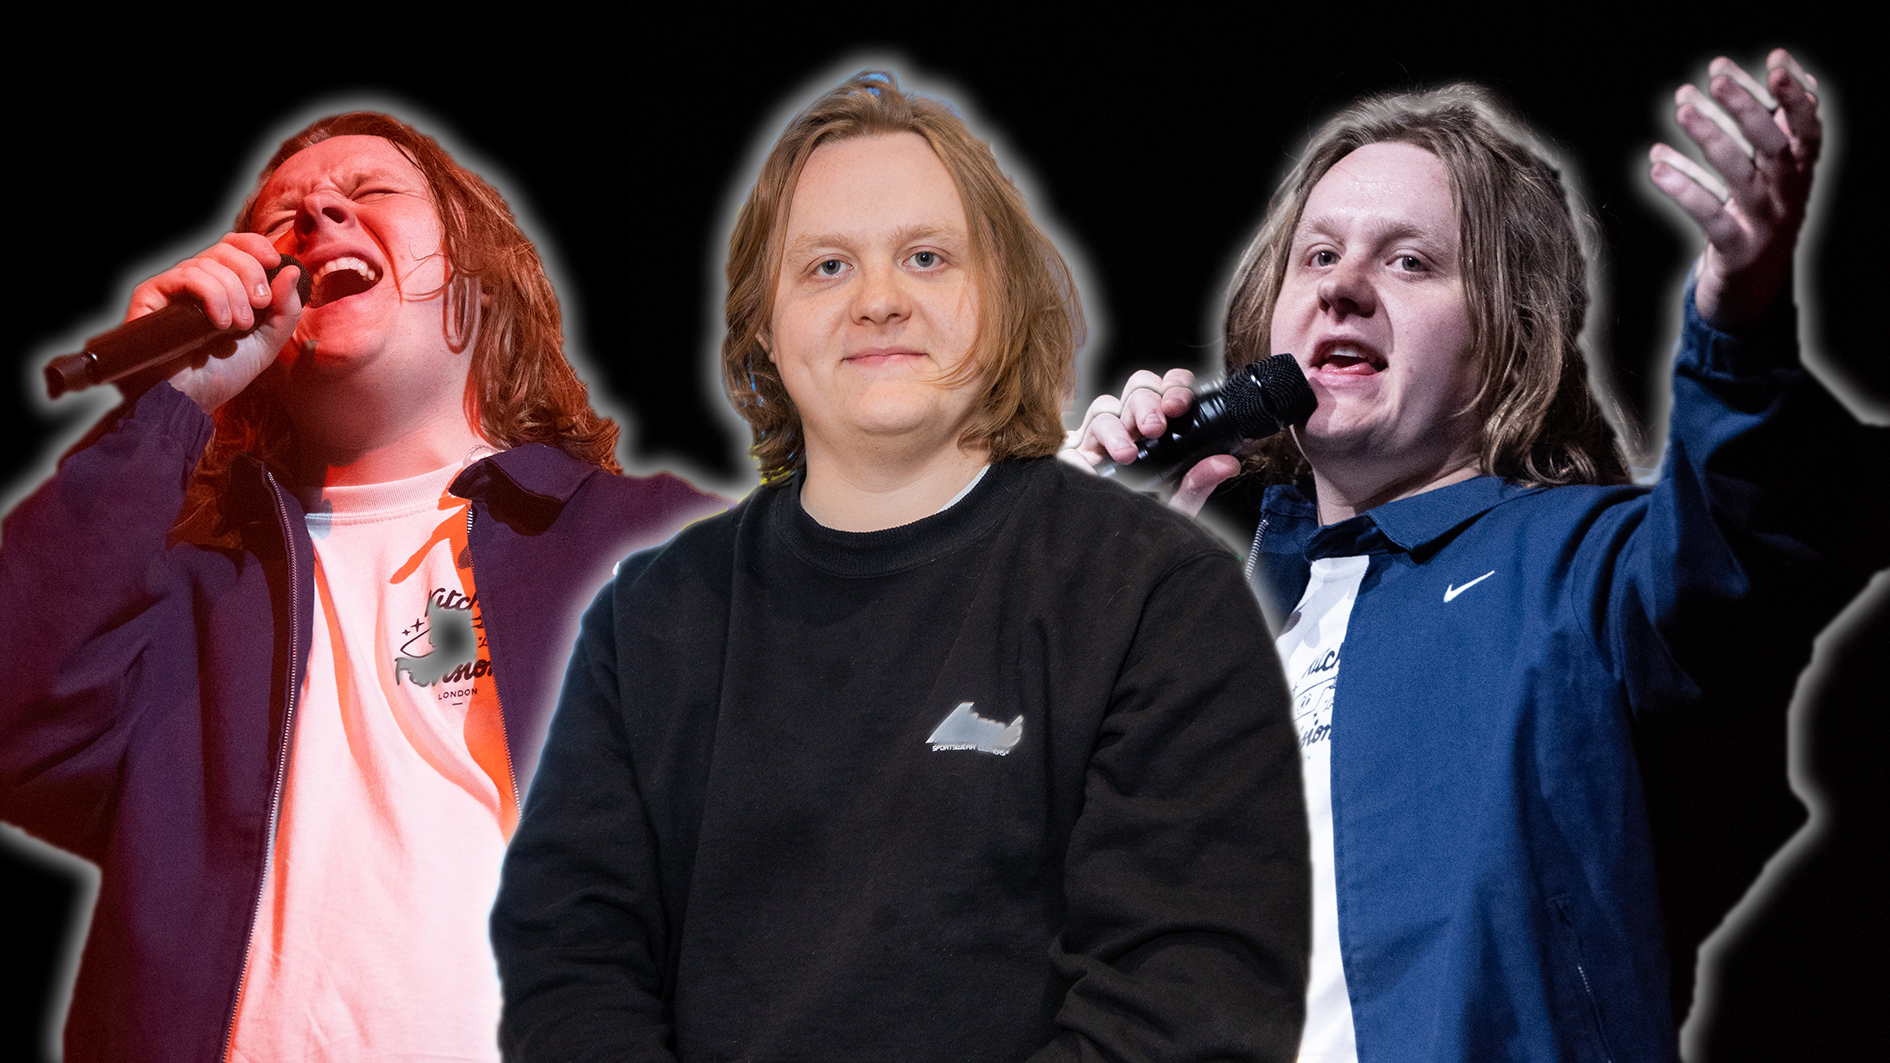 Lewis Capaldi's songs: The meanings behind the lyrics of his 5 biggest hits